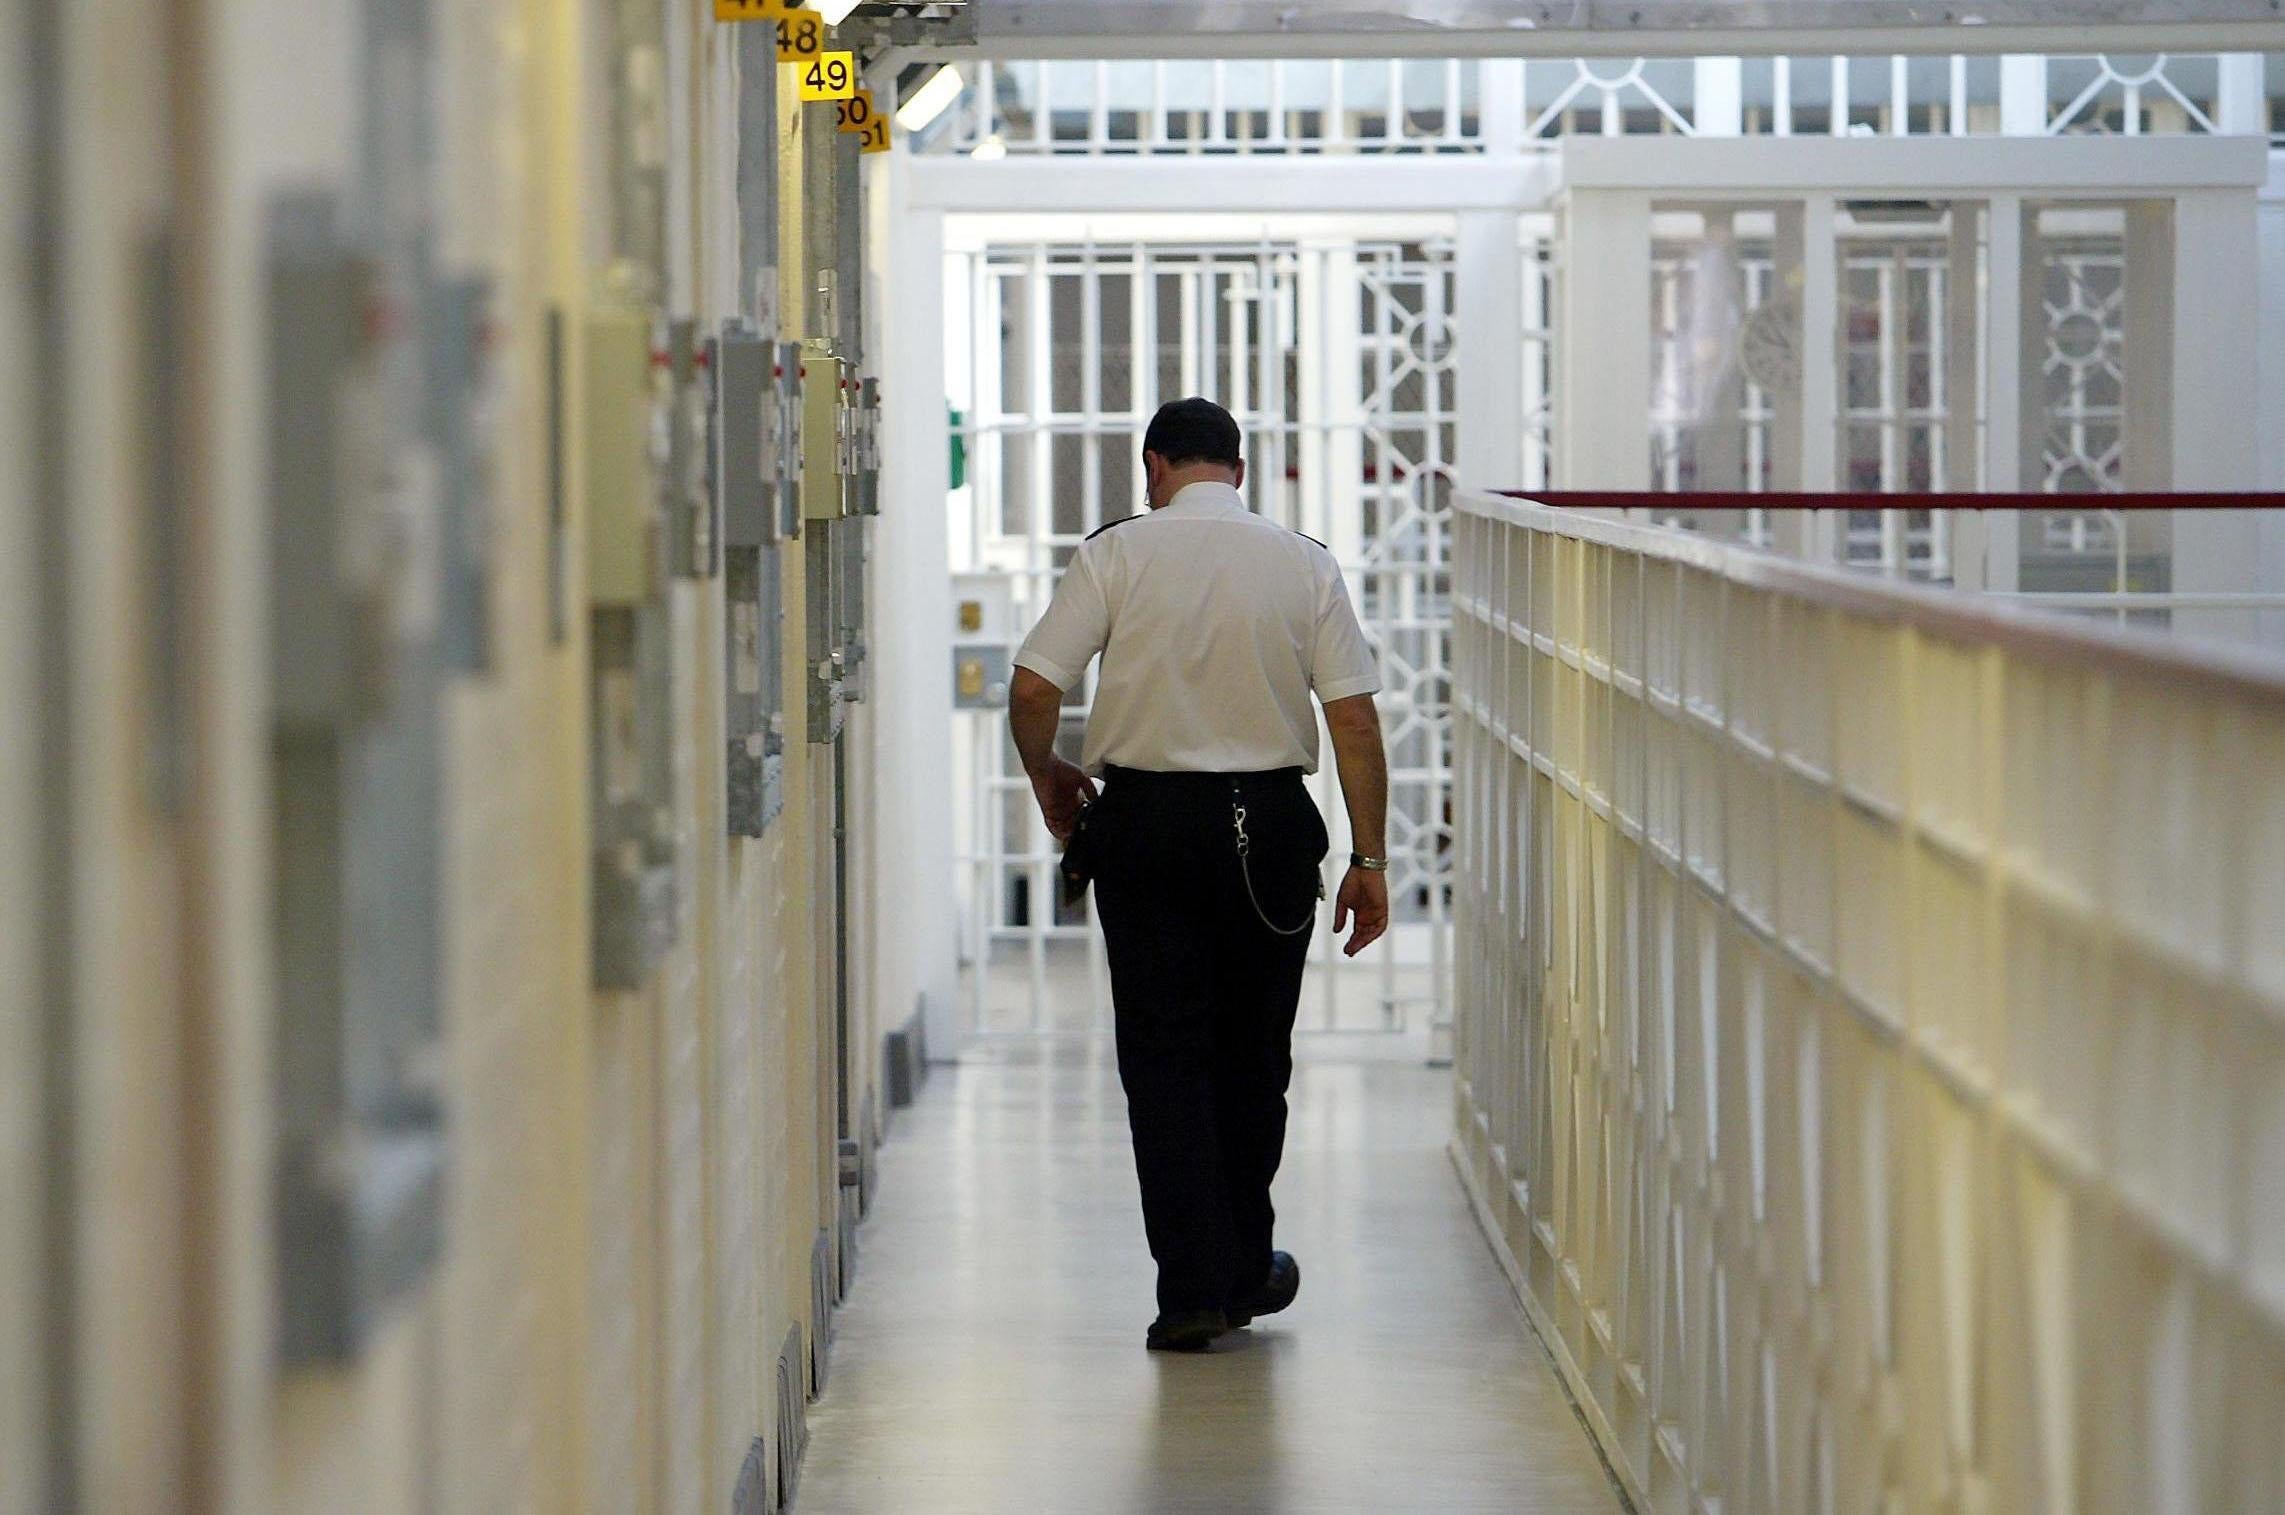 Prison officials have been photocopying mail to prevent drug-soaked letters getting through (Gareth Copley/PA)